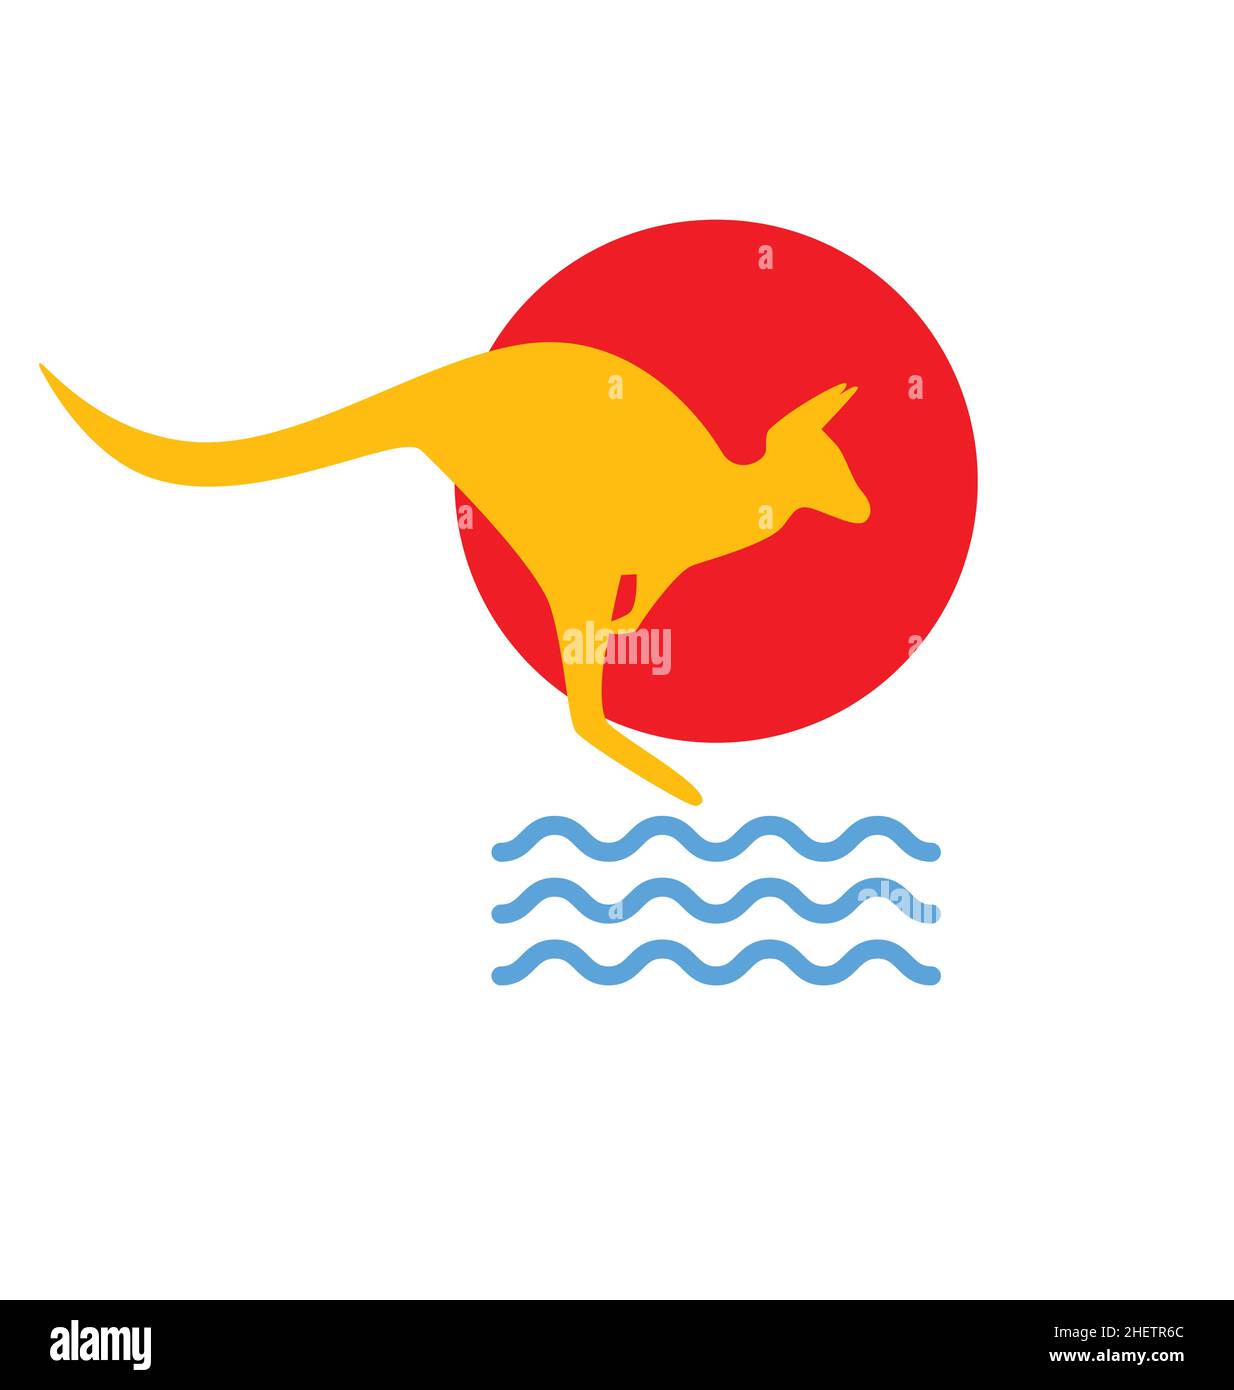 simplified stylised stylized australian kangaroo silhouette with red sun and blue water australia outback logo symbol icon Stock Vector